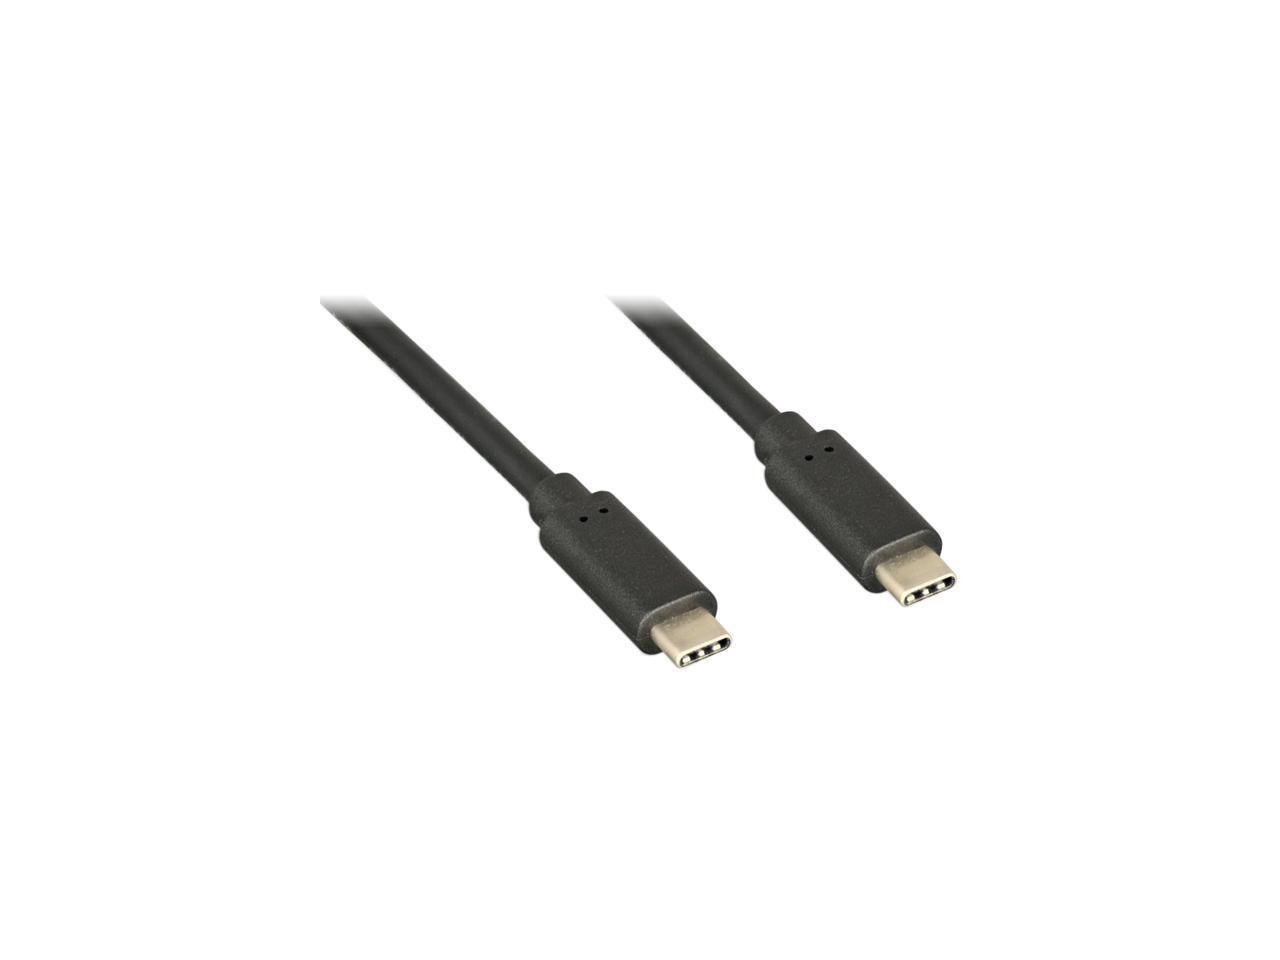 Nippon Labs 1.5 FT. Usb Type C 3.1 Gen 2 Male To Male Cable